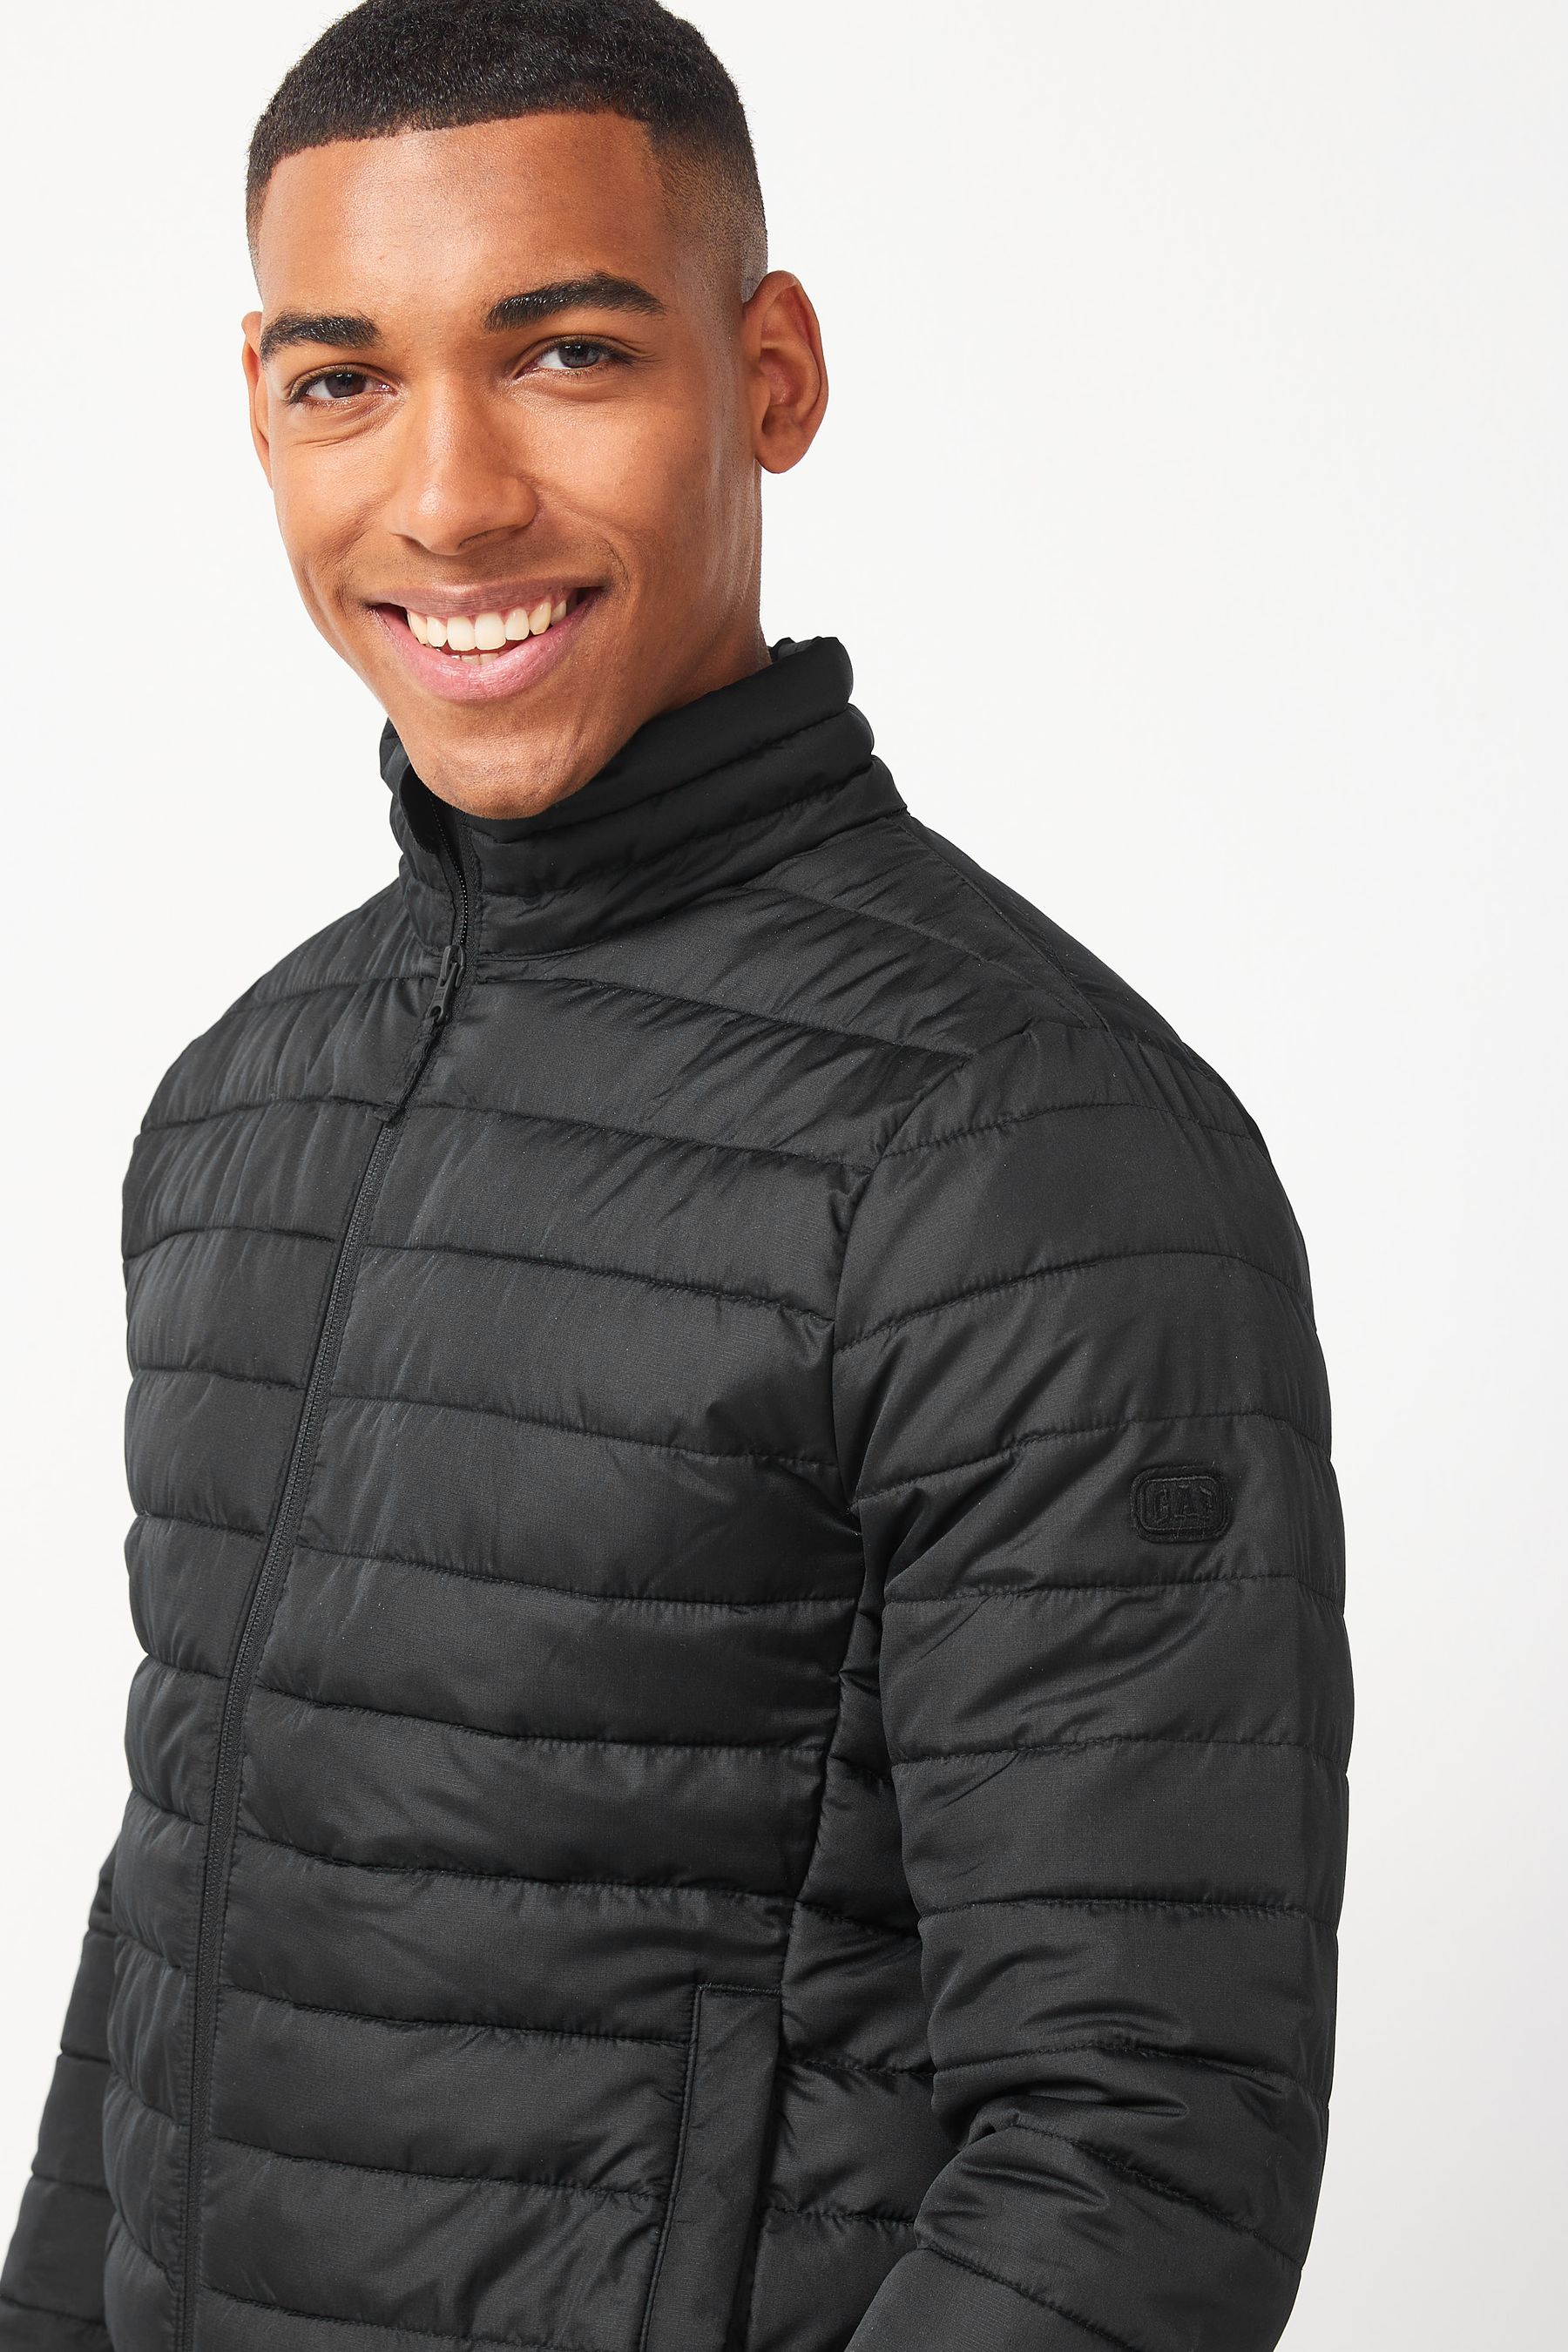 Buy Black ColdControl Puffer Jacket from the Gap online shop